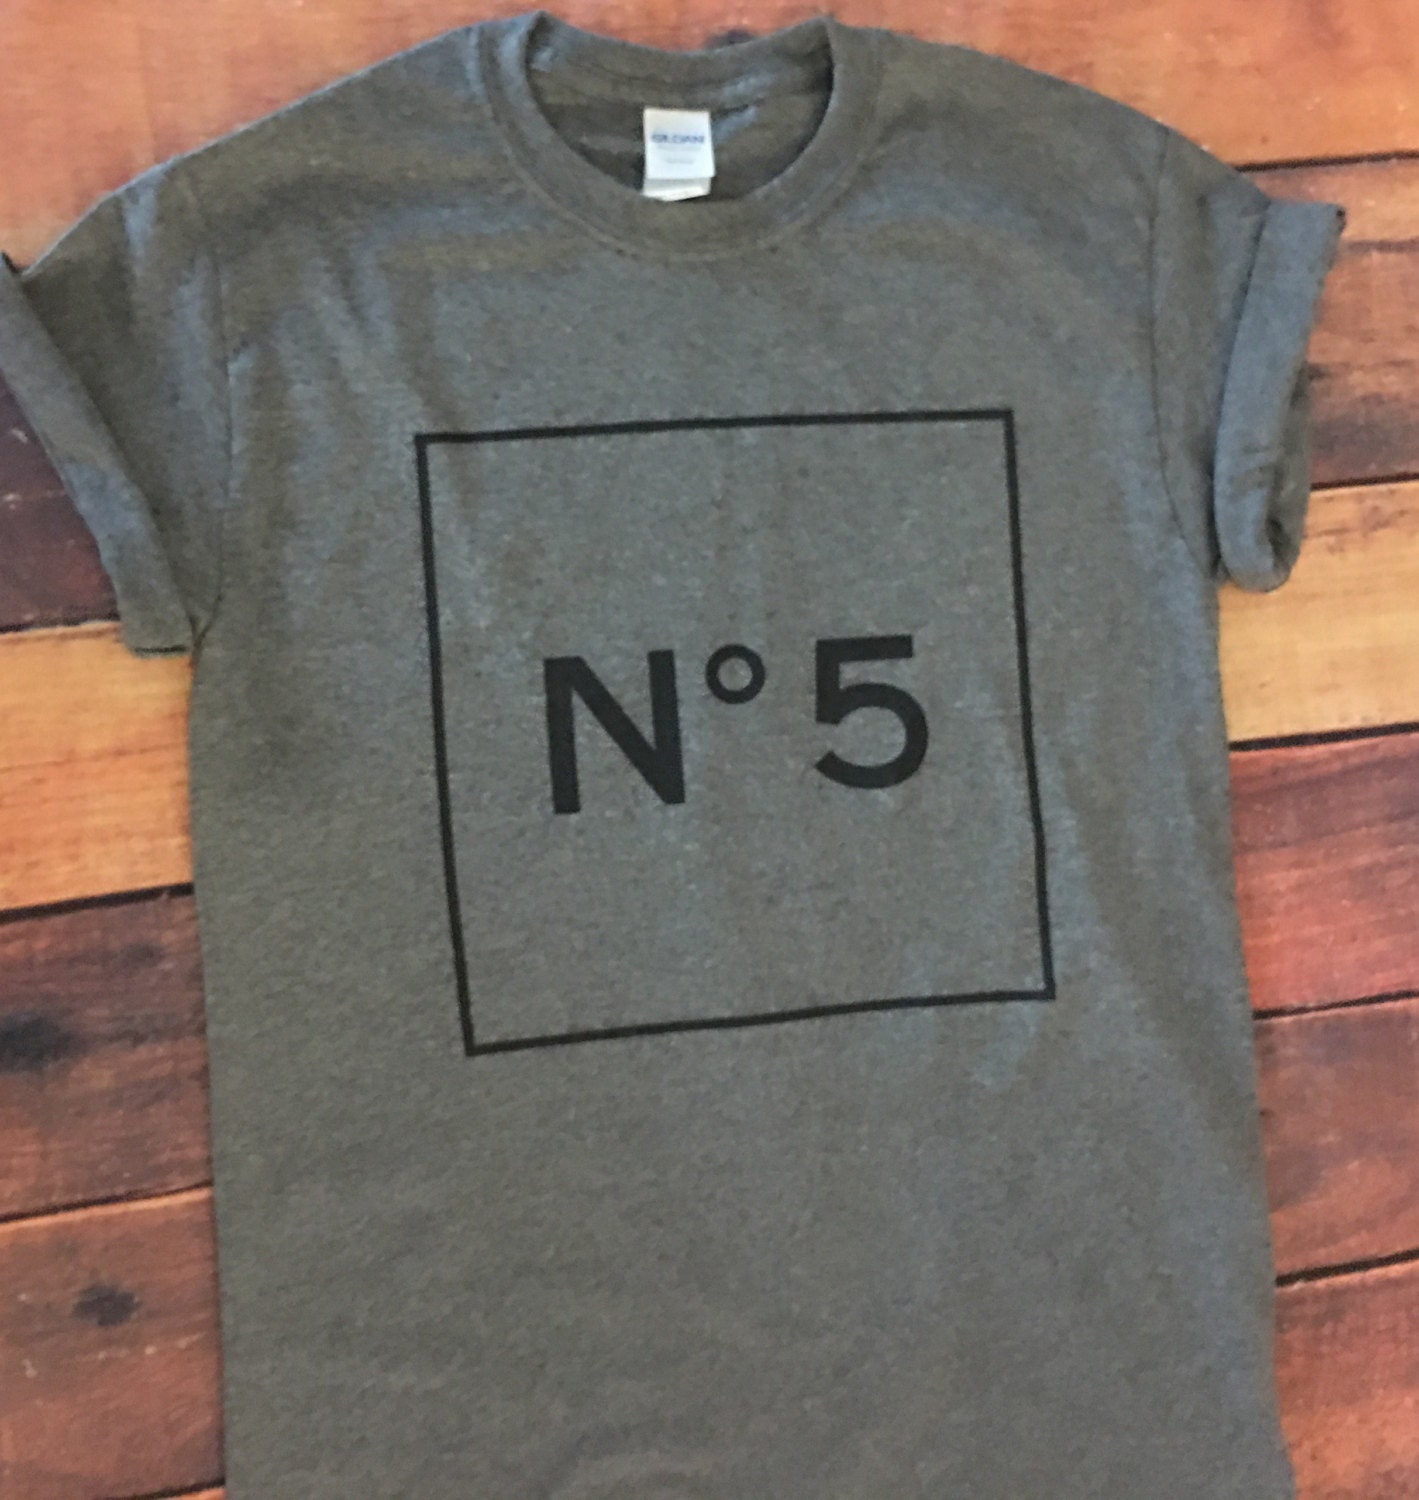 Chanel no. 5 tshirt; chanel gift; Gifts for Mom; CHANEL; Valentine's Day gift; Favorite; girlfriend gifts; BFF Gift; Vintage Fashion; No. 5